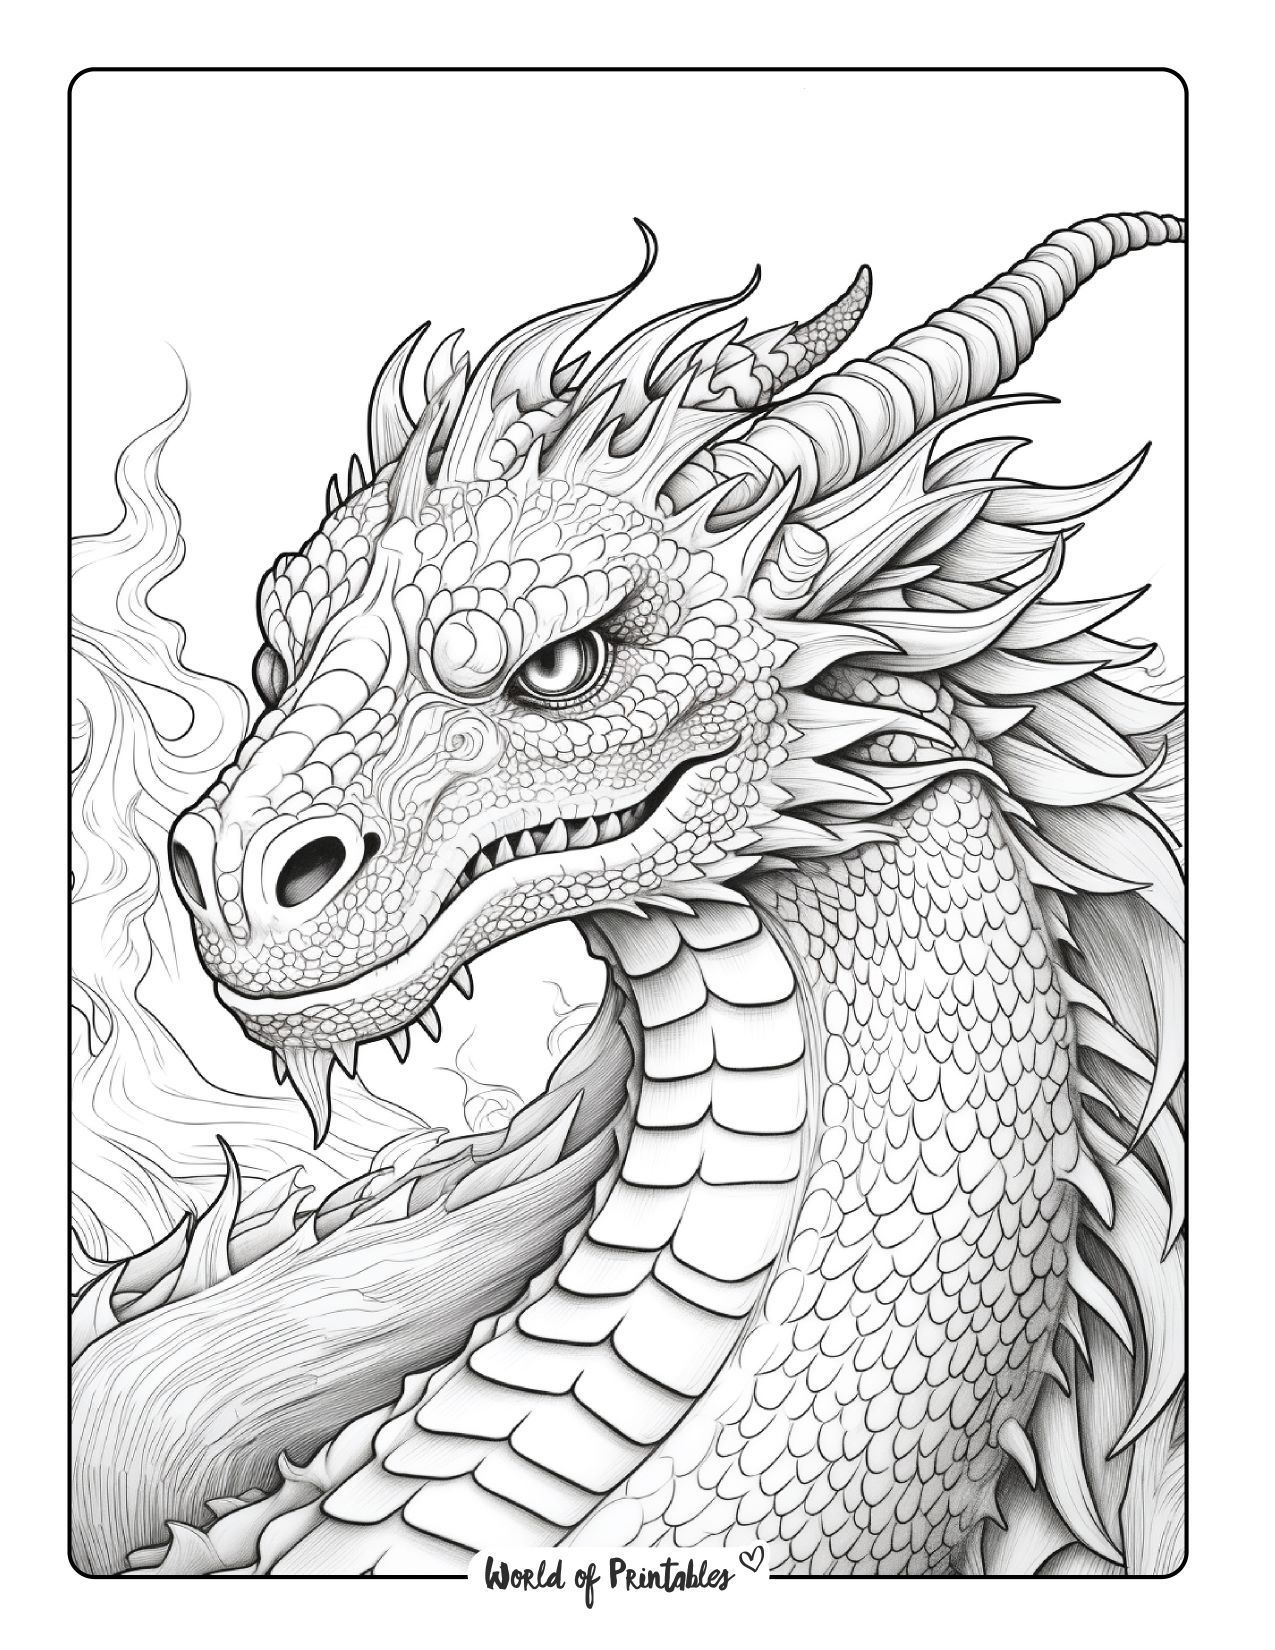 Dragon coloring pages for adults dragon coloring page cat coloring page coloring pages